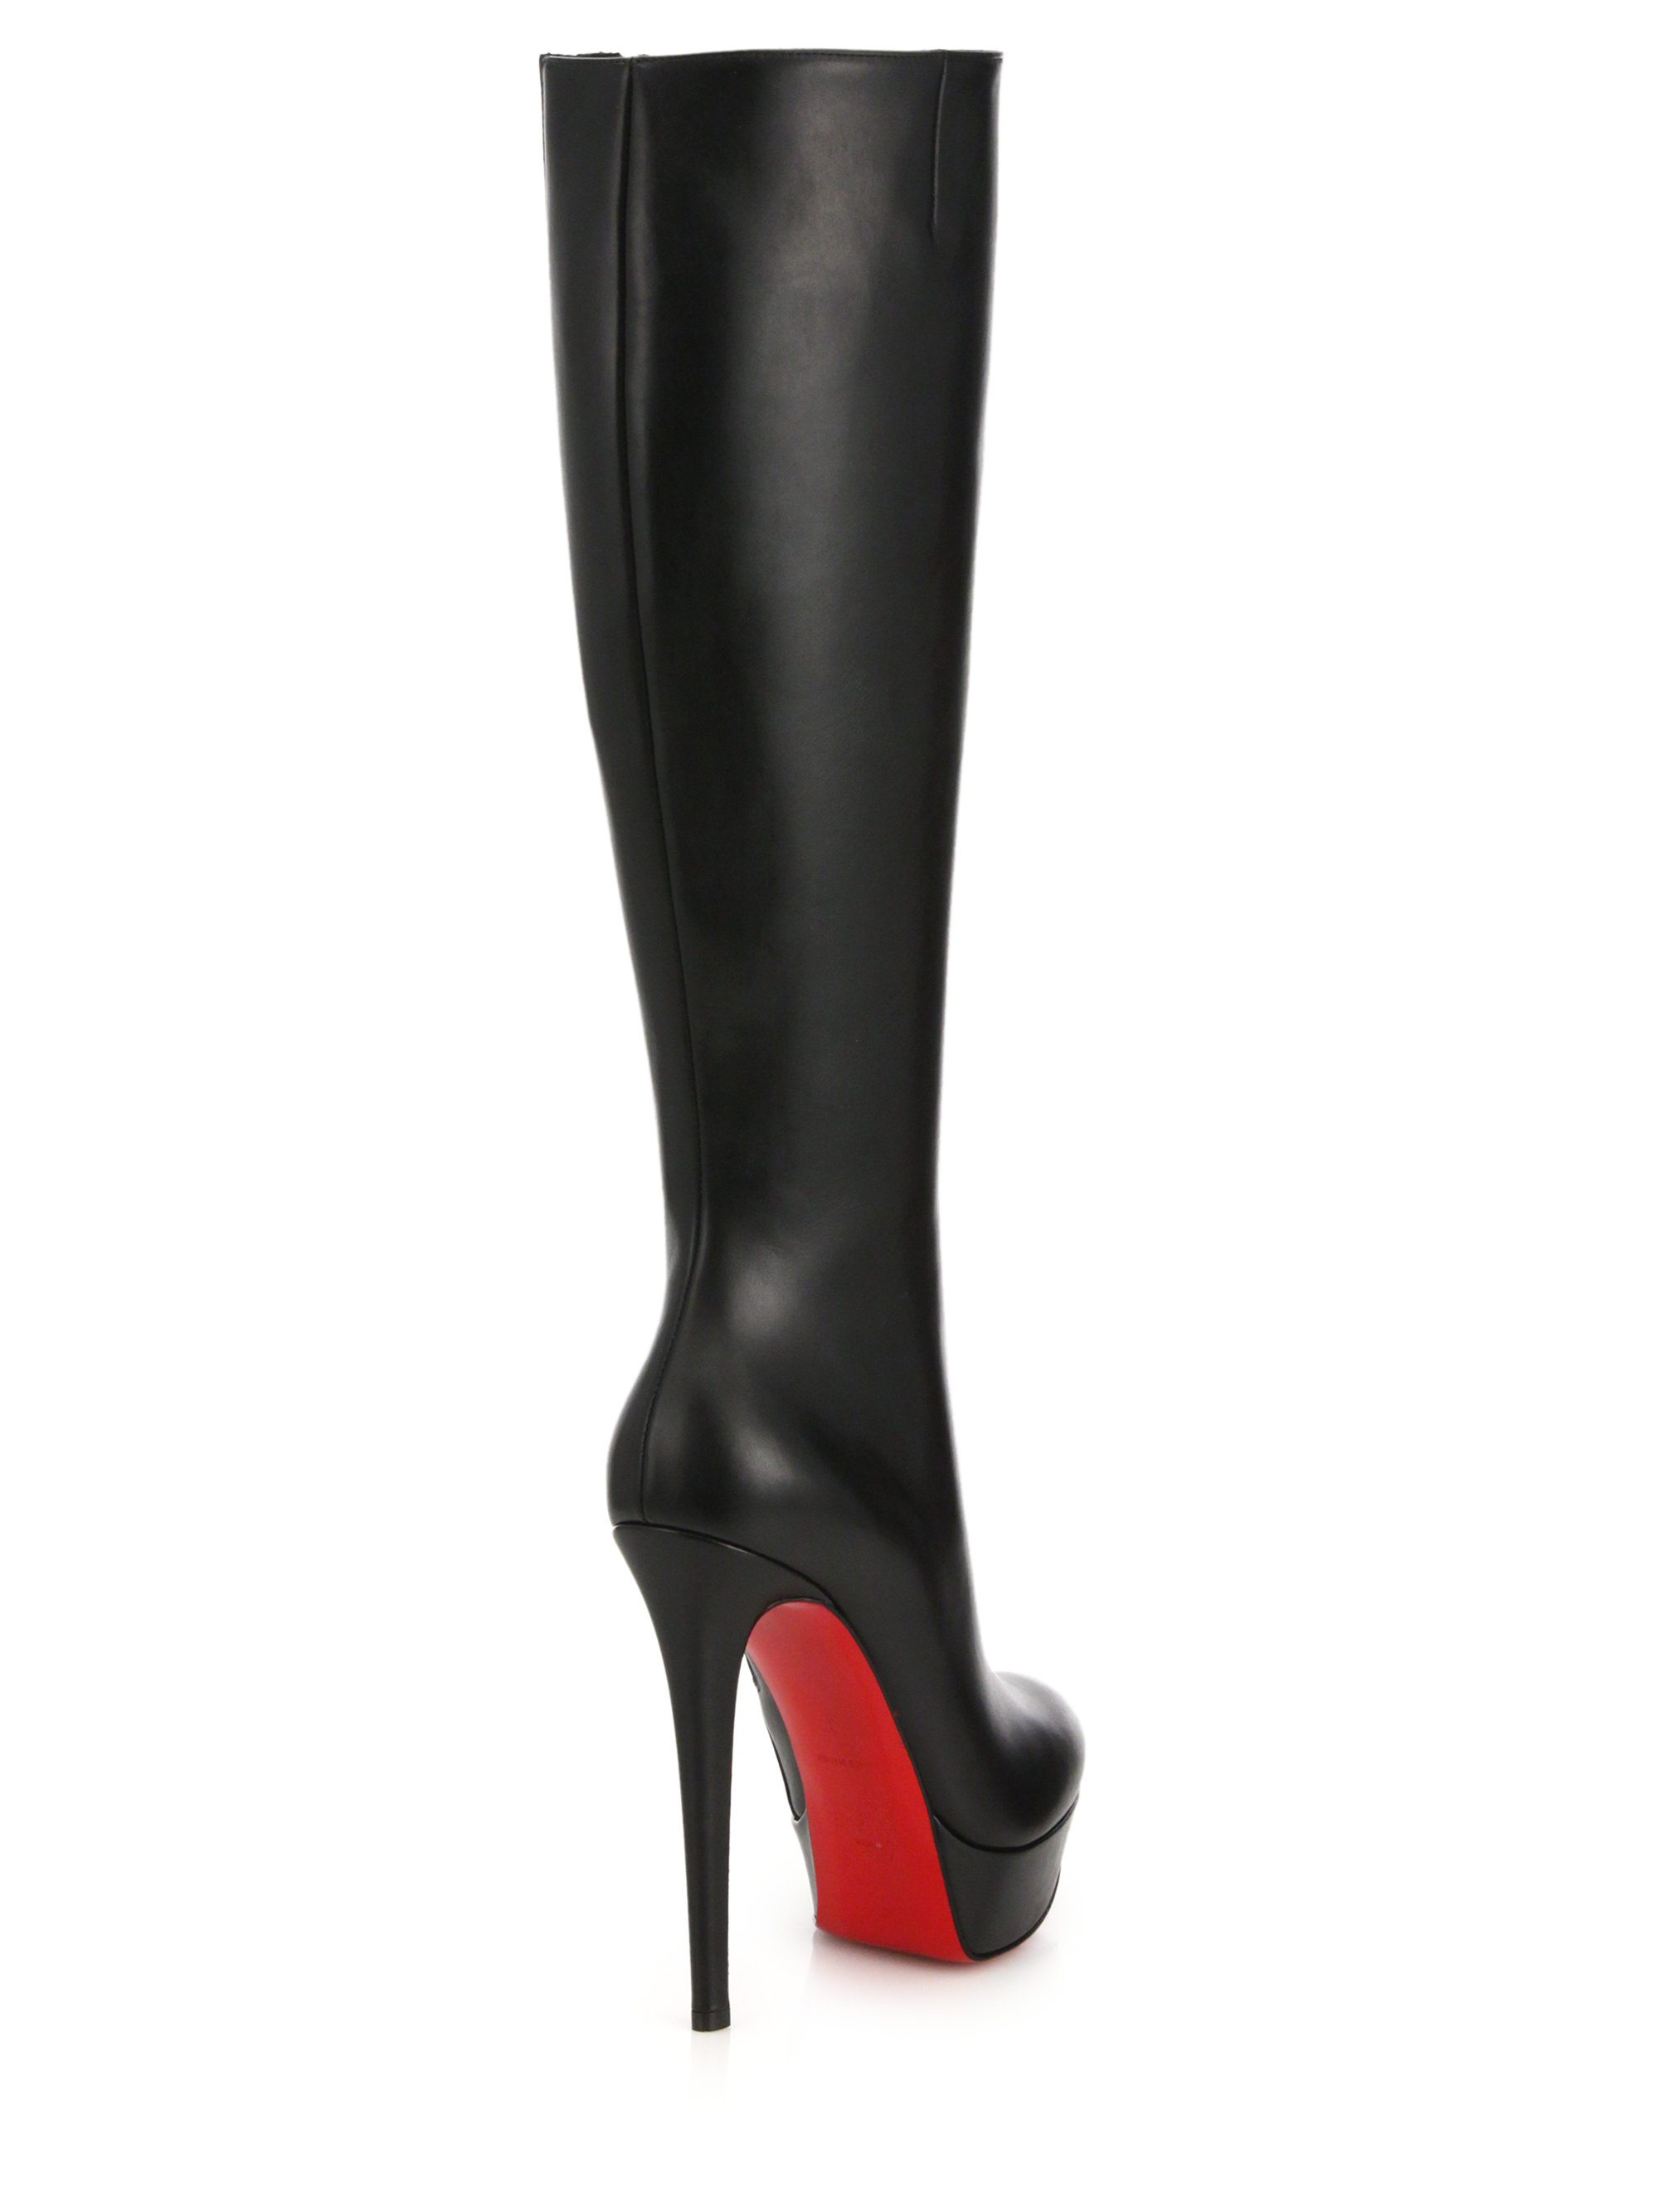 Lyst - Christian Louboutin Bianca Leather Knee-high Boots in Black